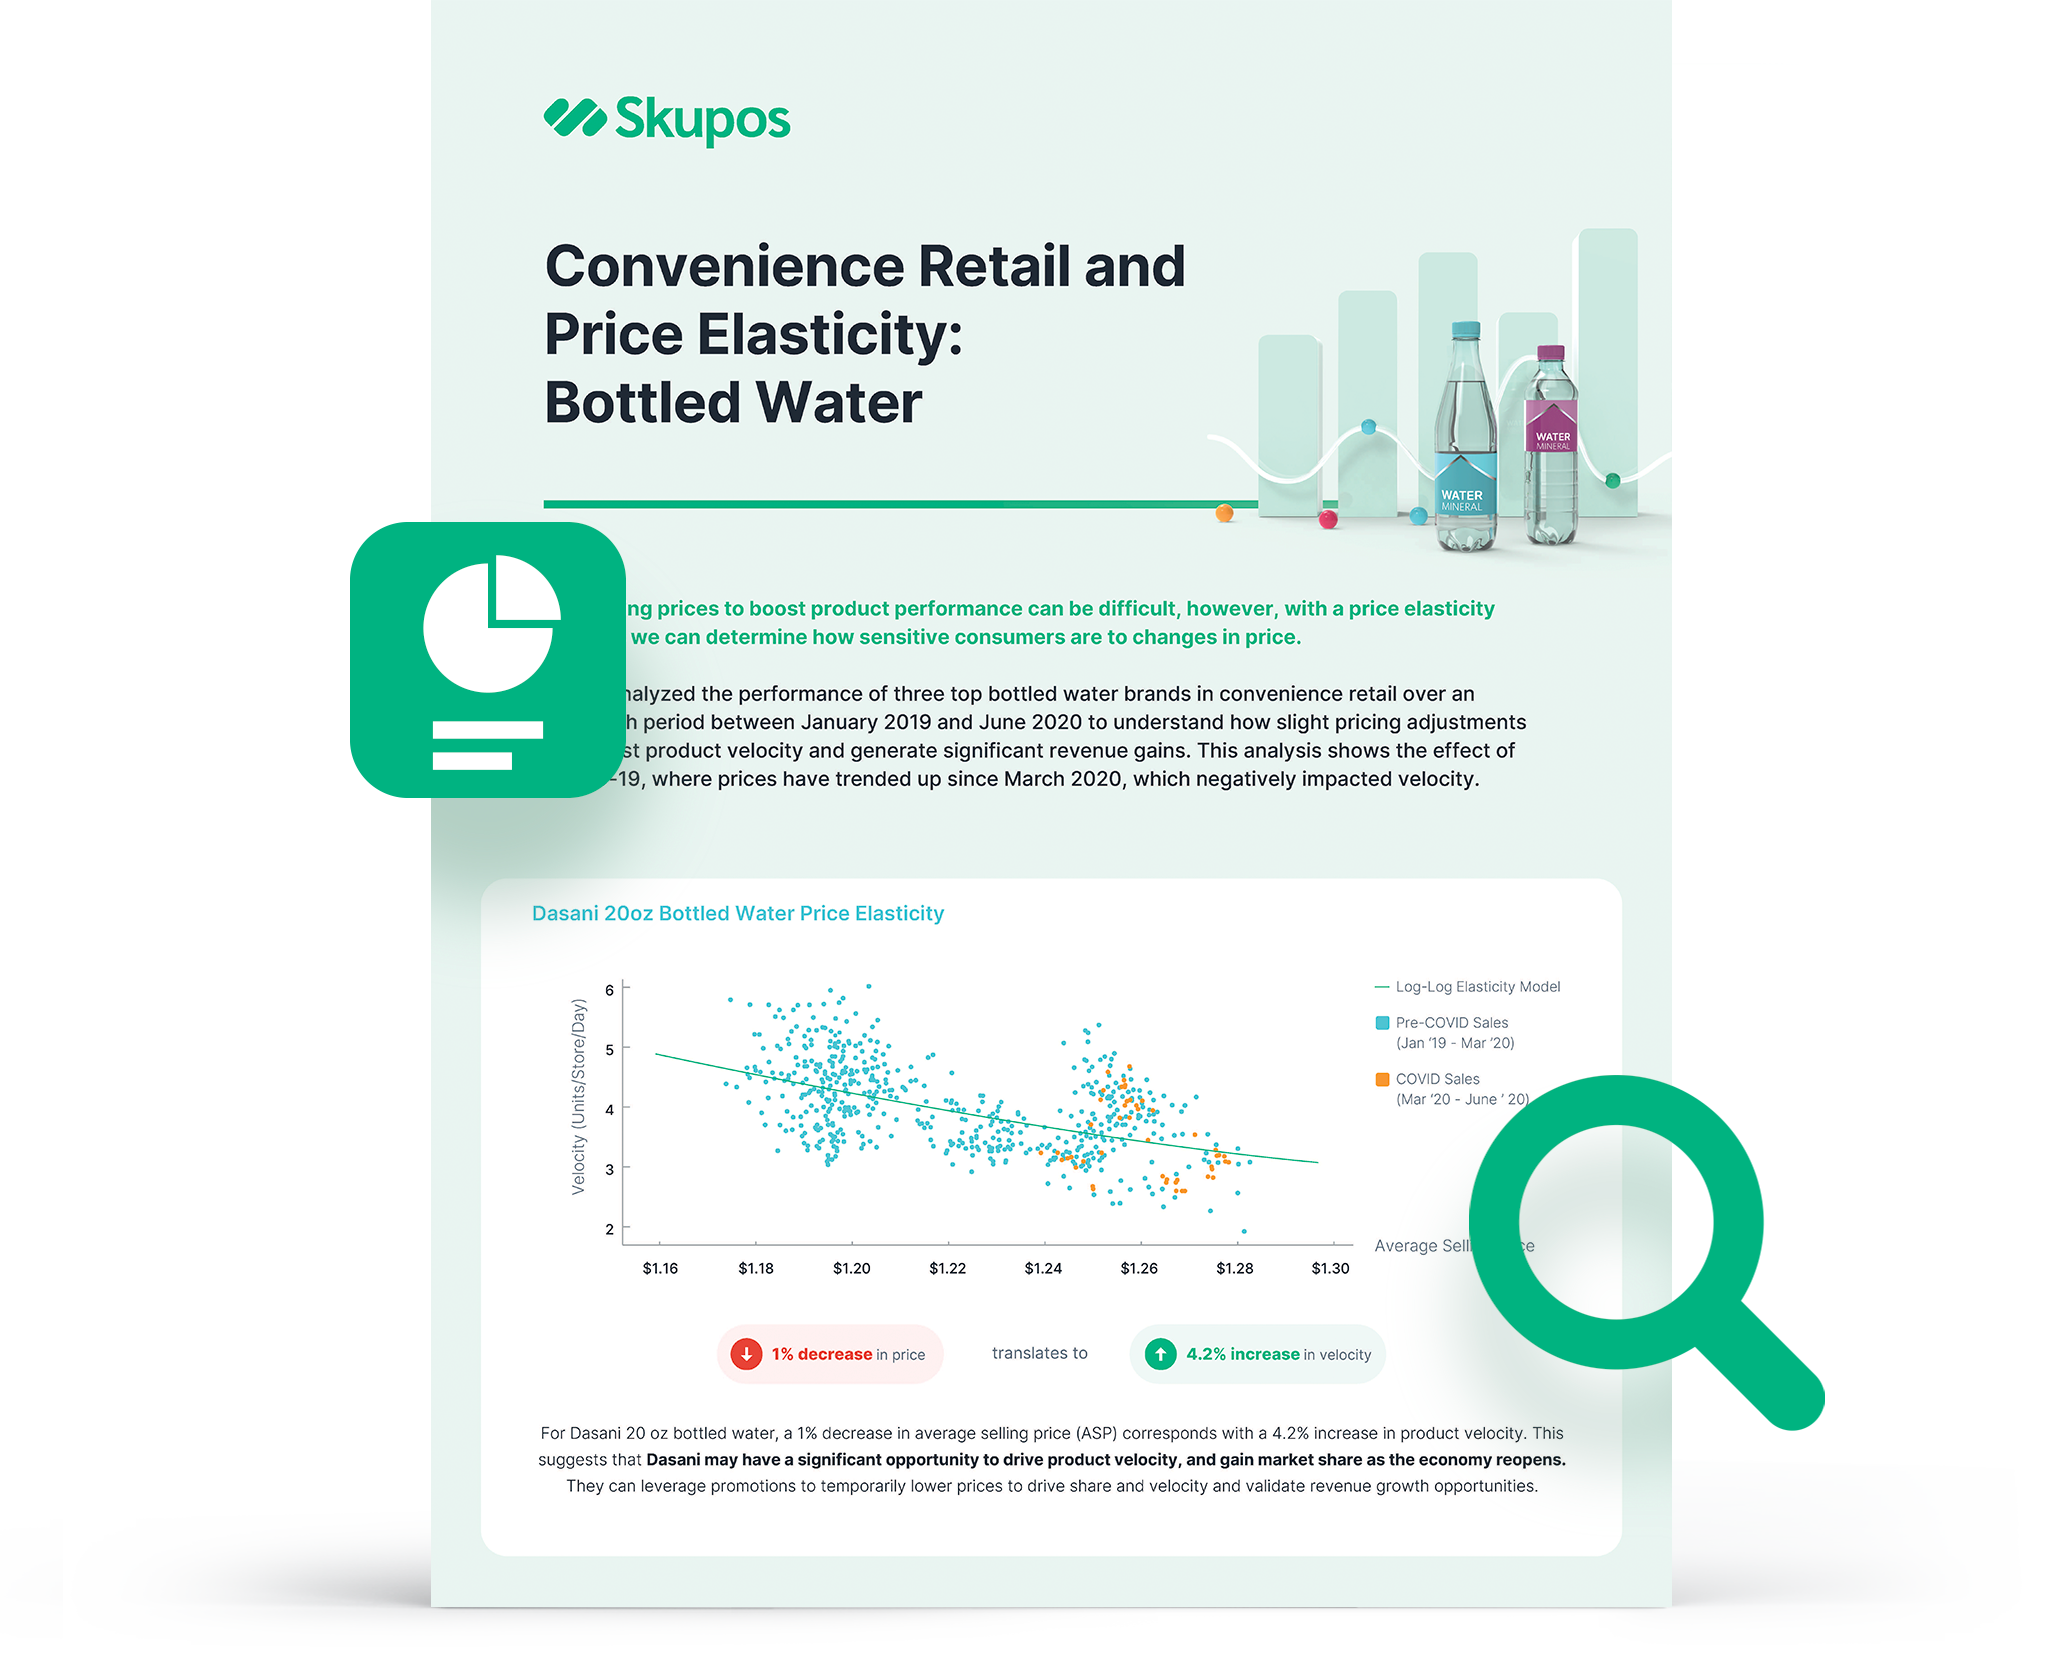 Bottled Water Price Elasticity Analysis in Independent Convenience Retail